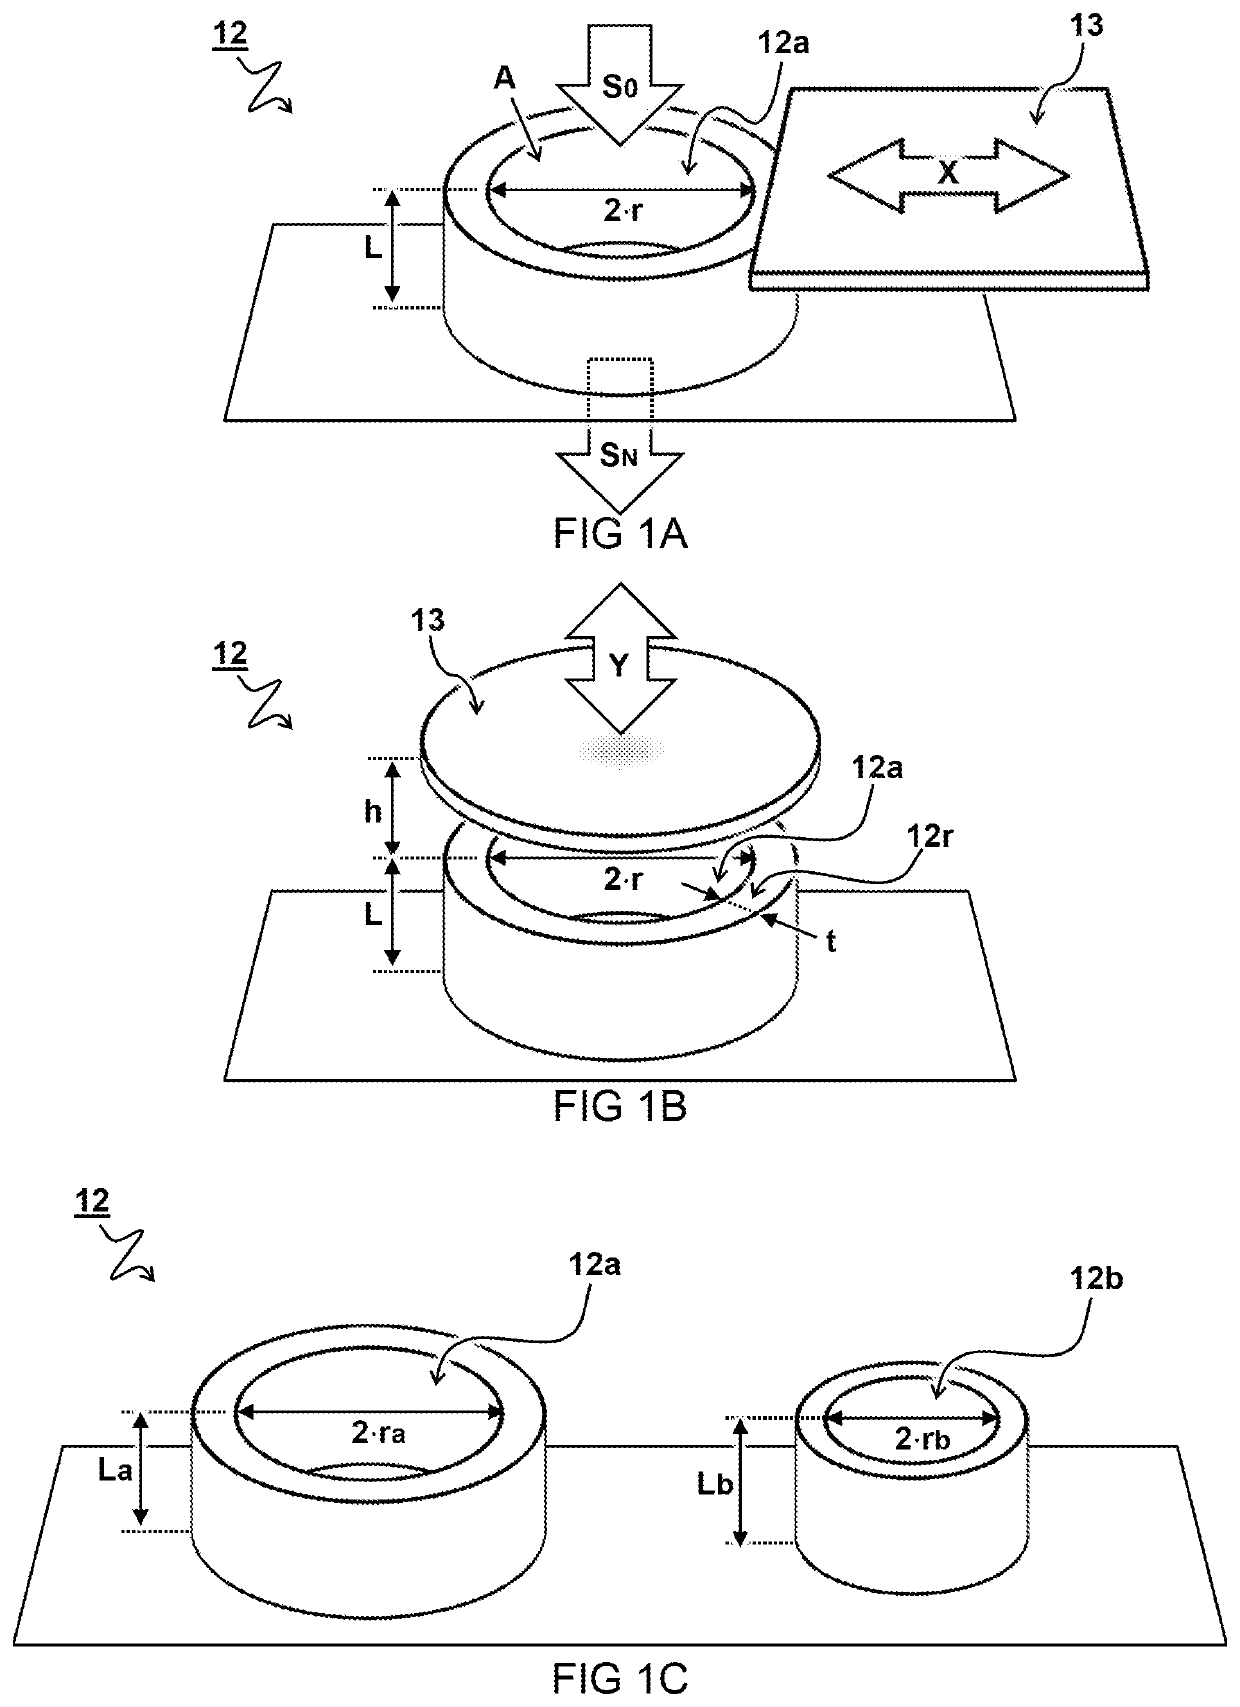 Acoustic filter with attenuation control